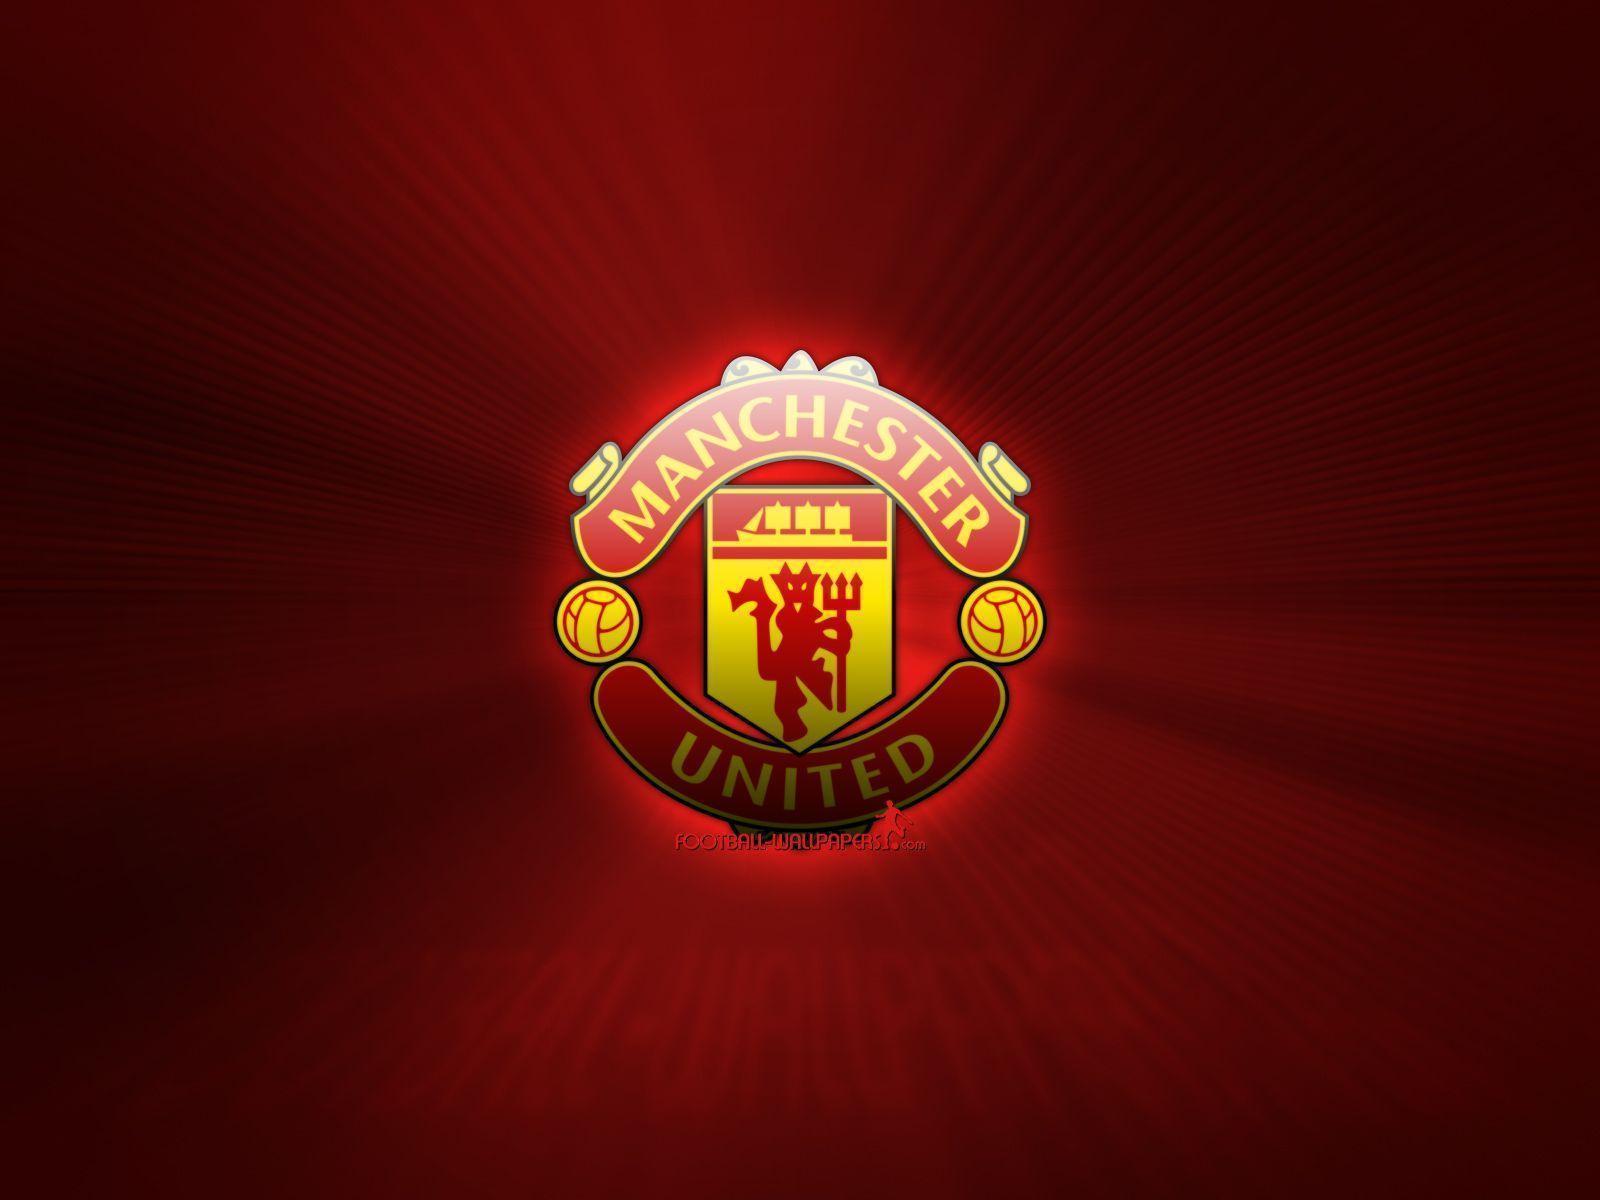 Apple iPhone 6 Plus Wallpapers in HD with – Manchester United Logo